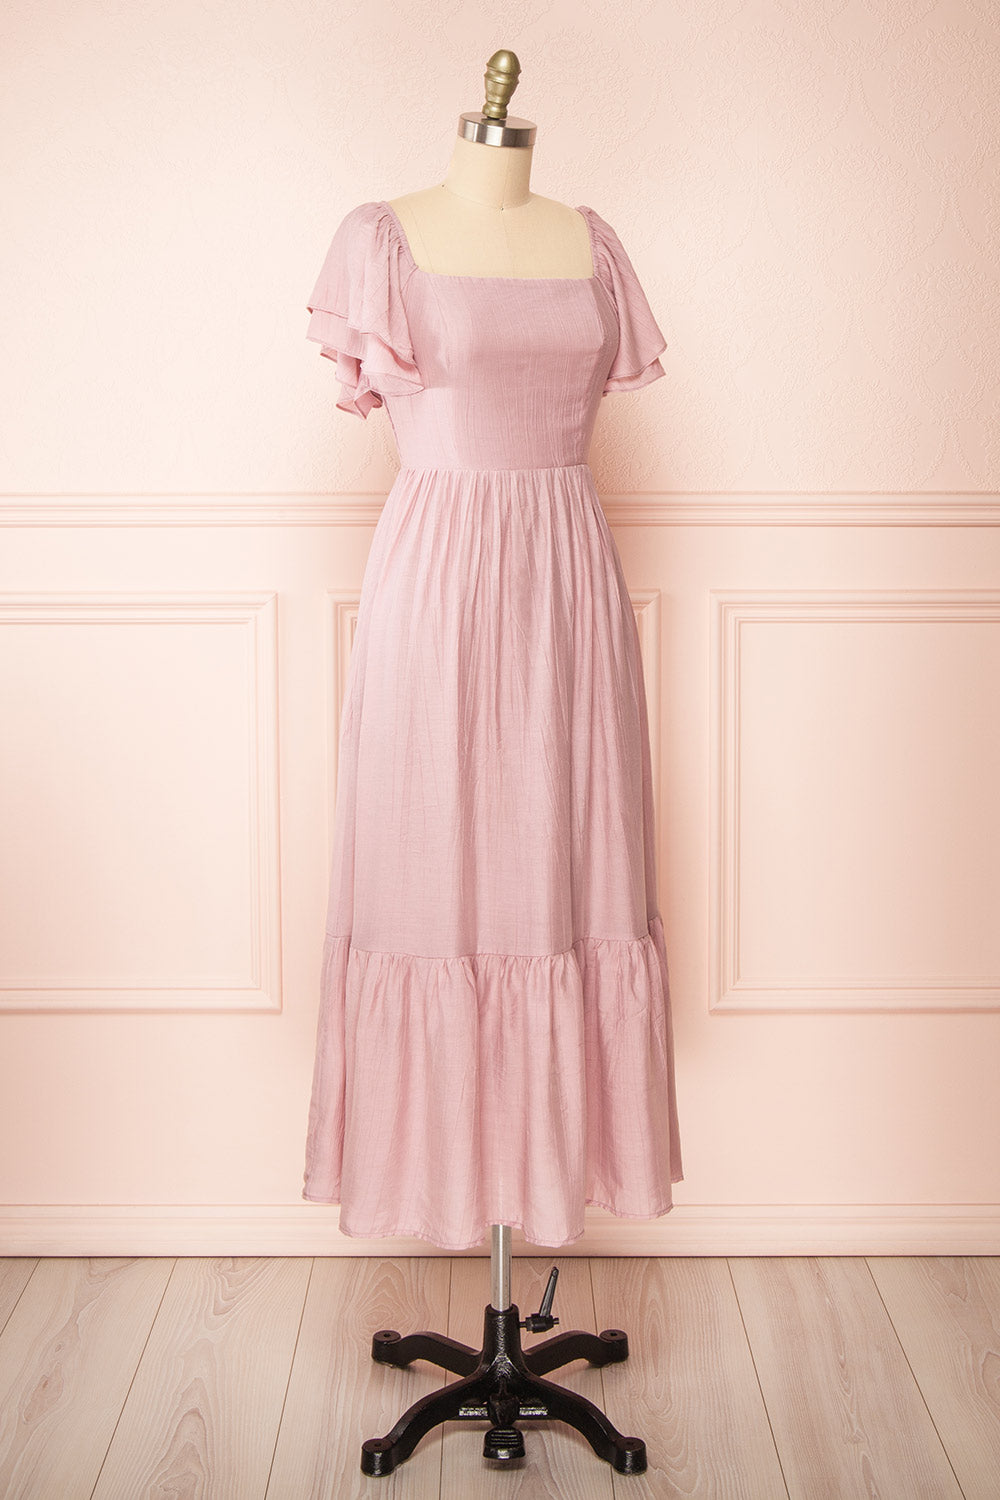 Myrtille Mauve Midi Dress w/ Ruffled Sleeves | Boutique 1861 side view